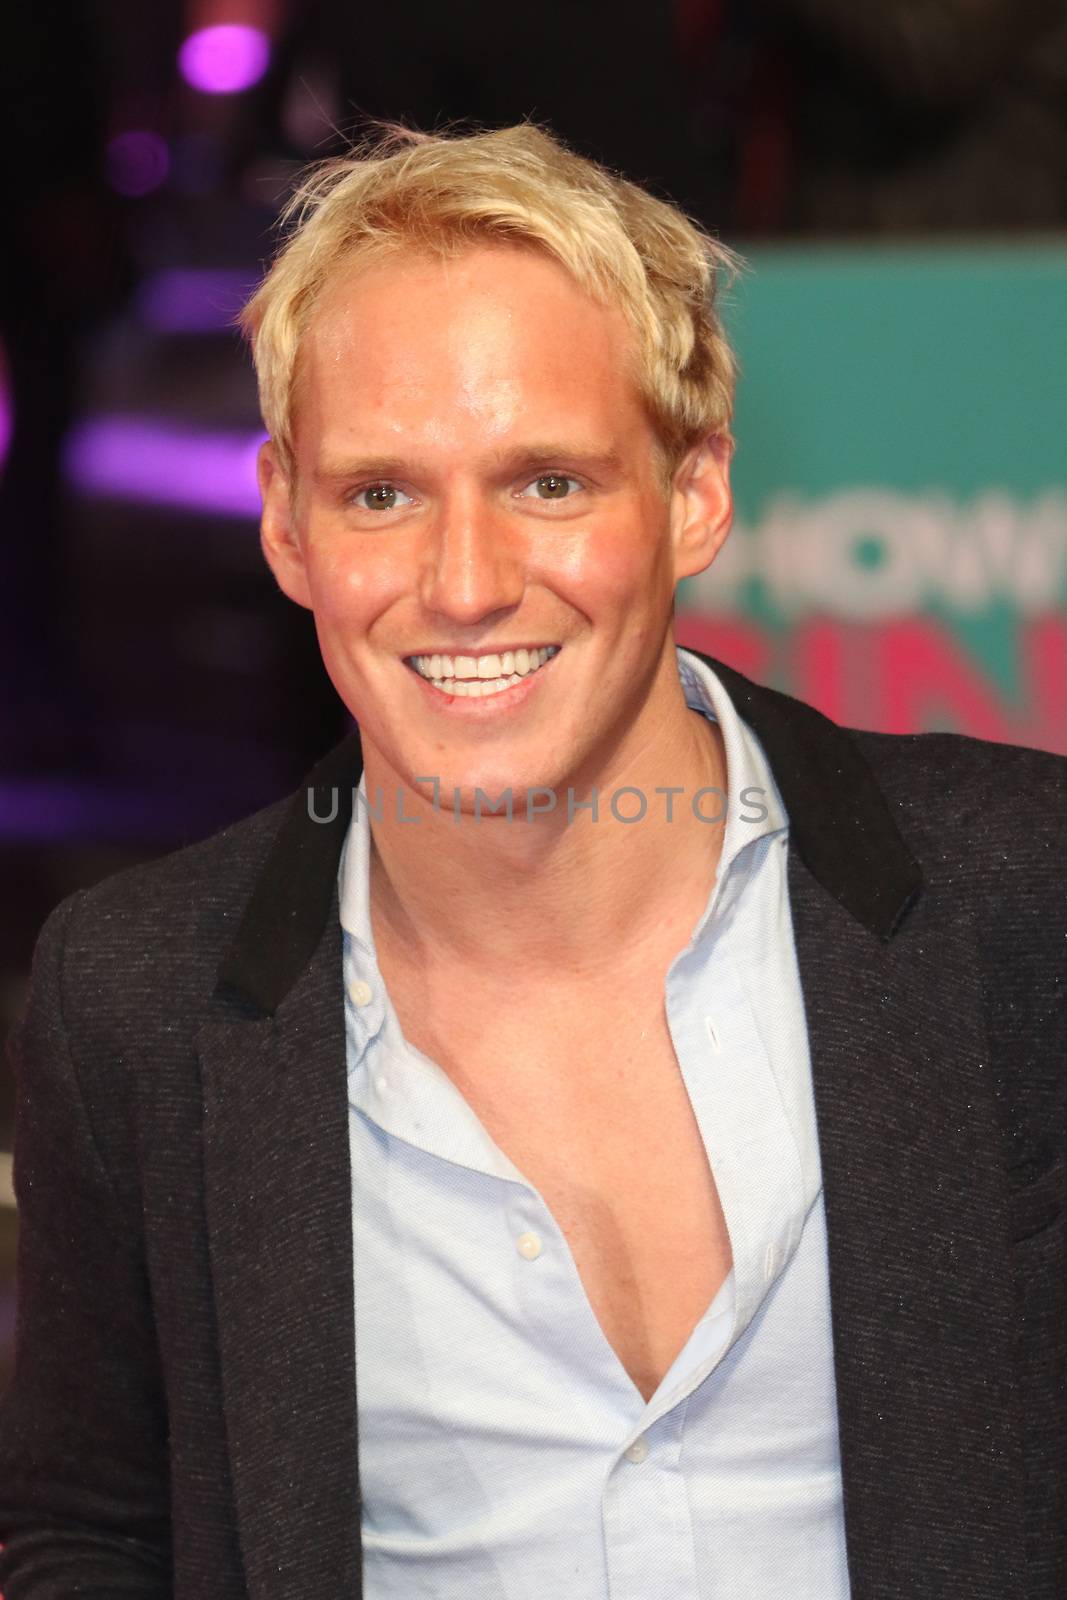 UK, London: Jamie Laing is pictured at How to be single European film premiere at Leicester Square, London on February 9, 2016.